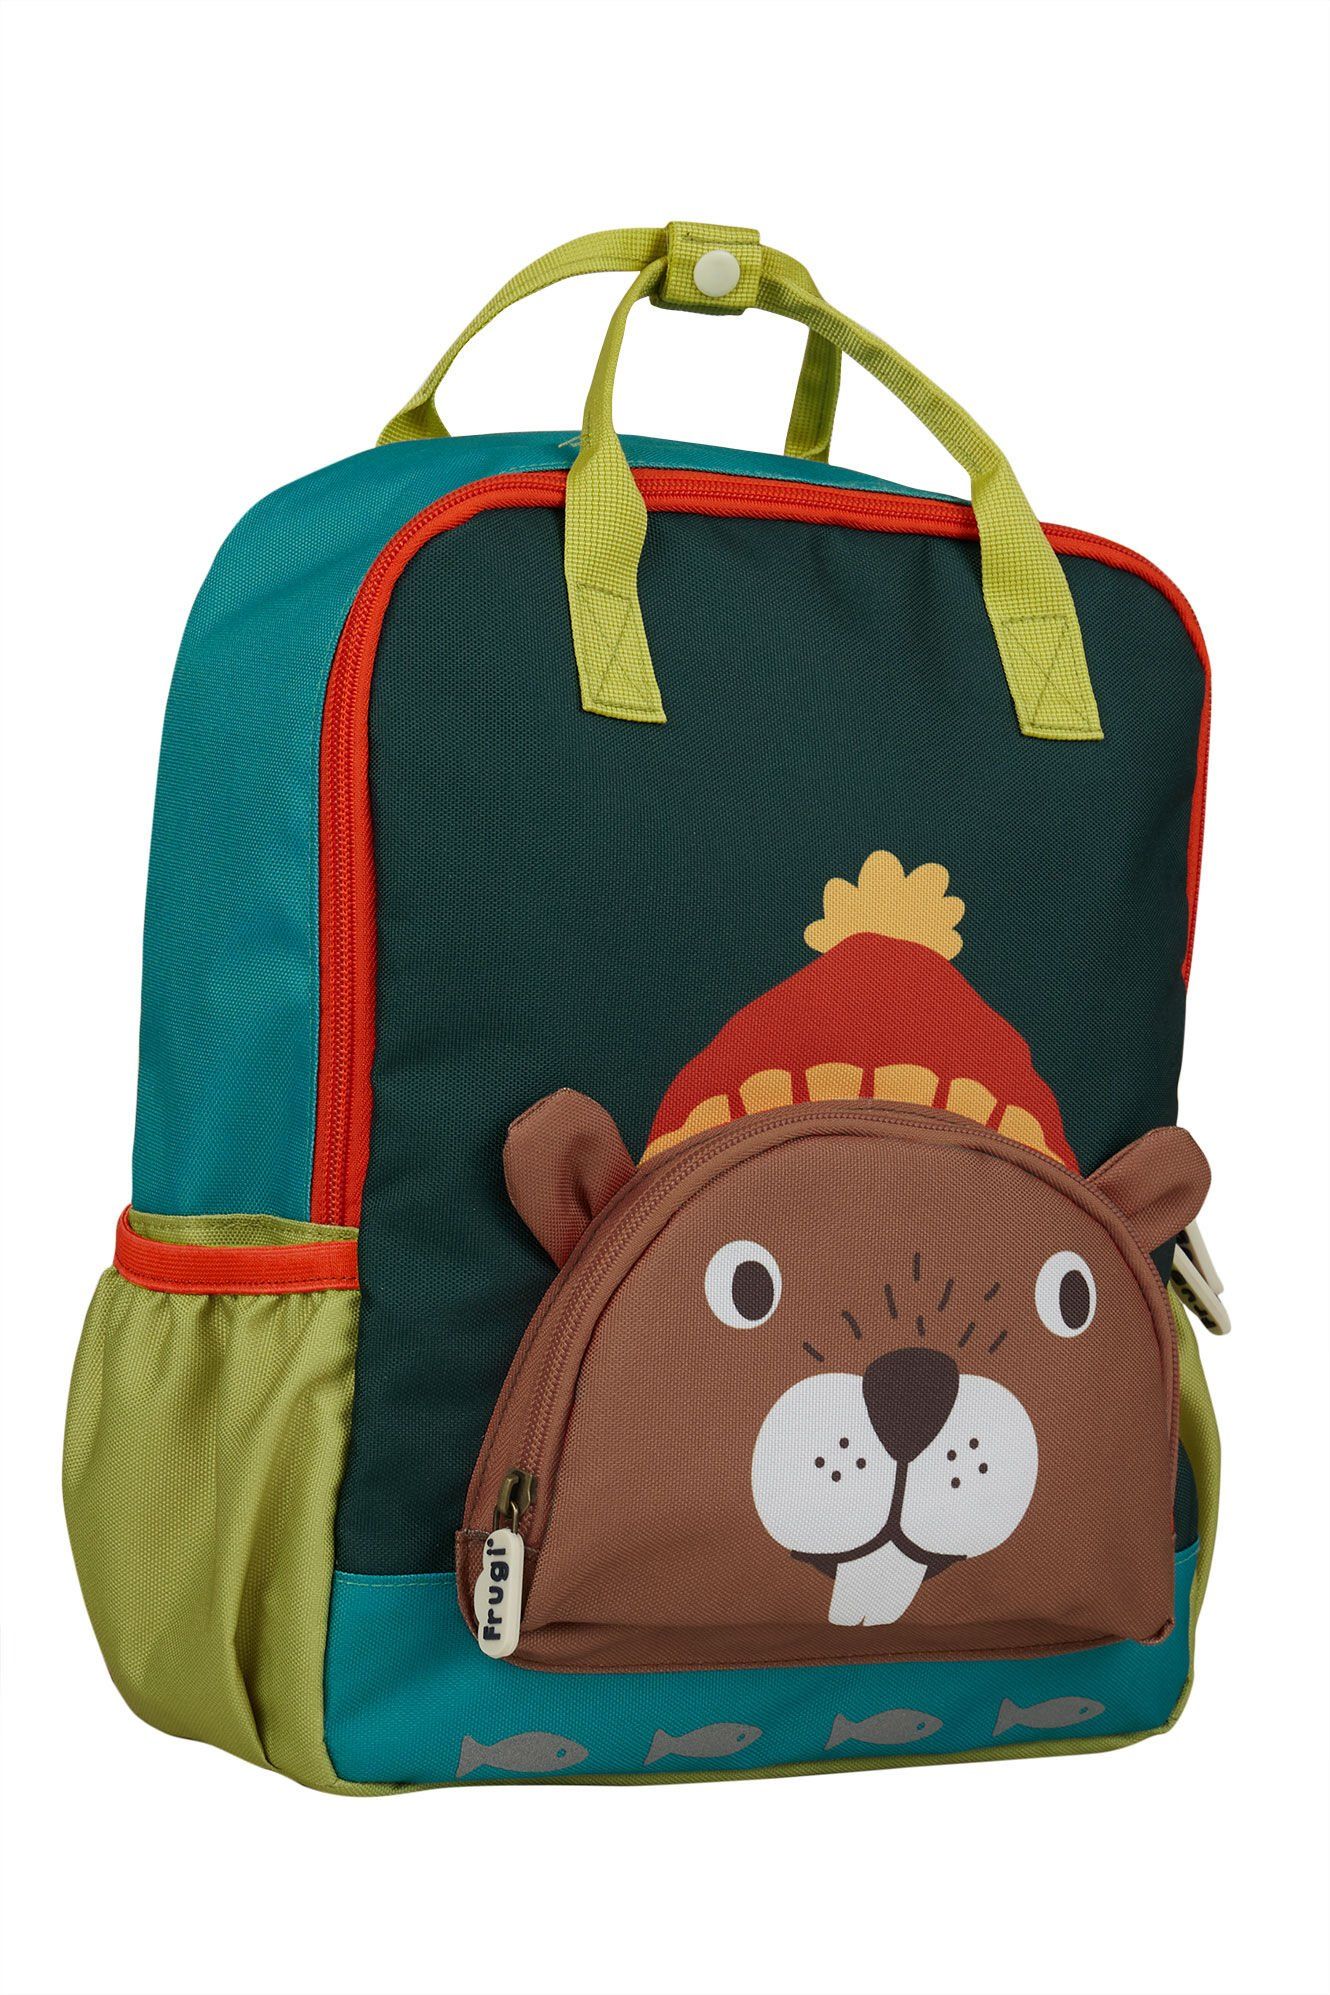 The National Trust Play Around Backpack